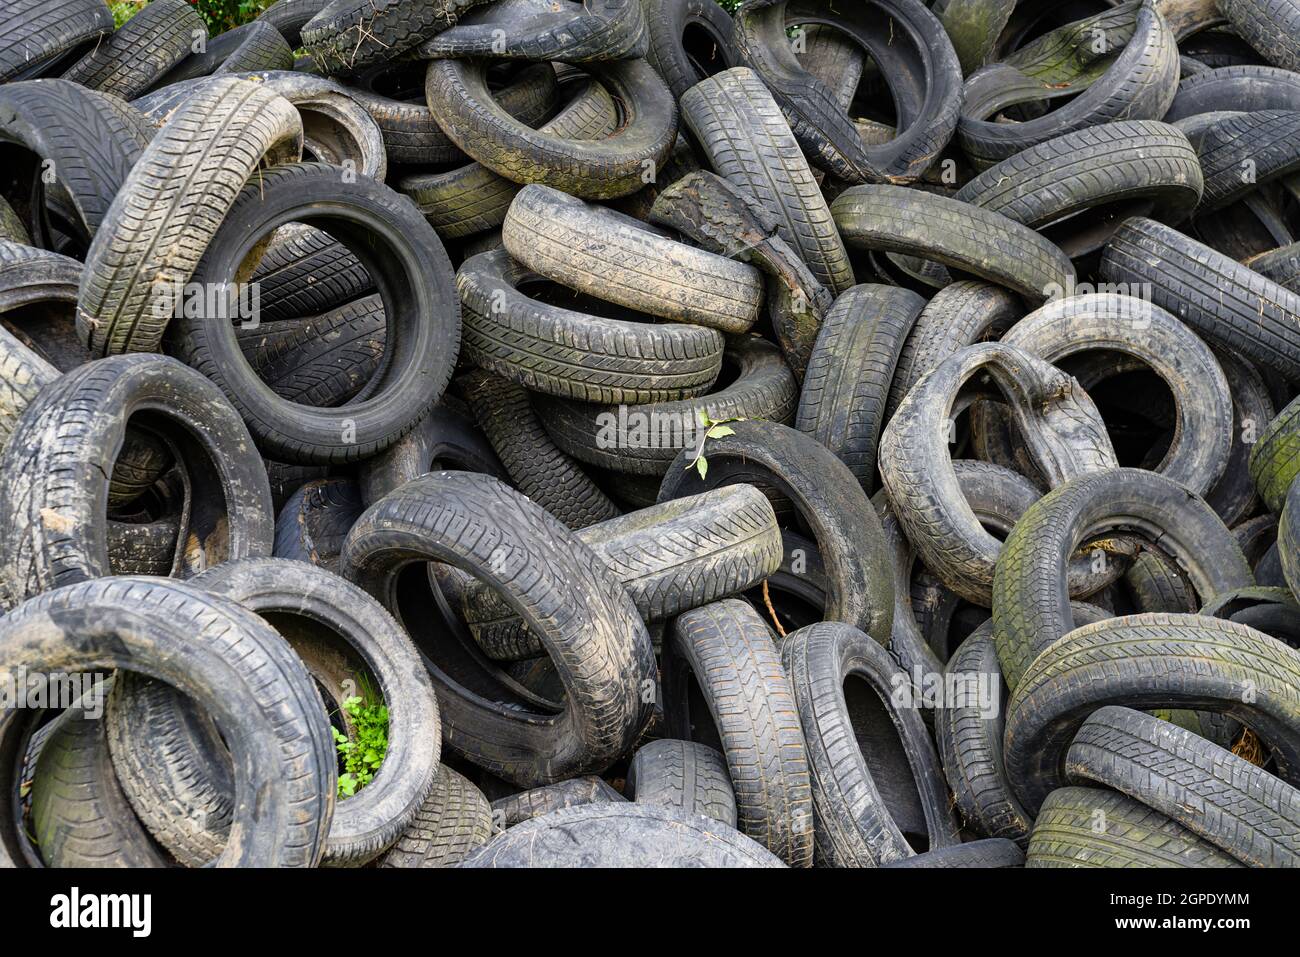 Pile of used tyres being used in a farm to weigh down a silage heap Stock Photo